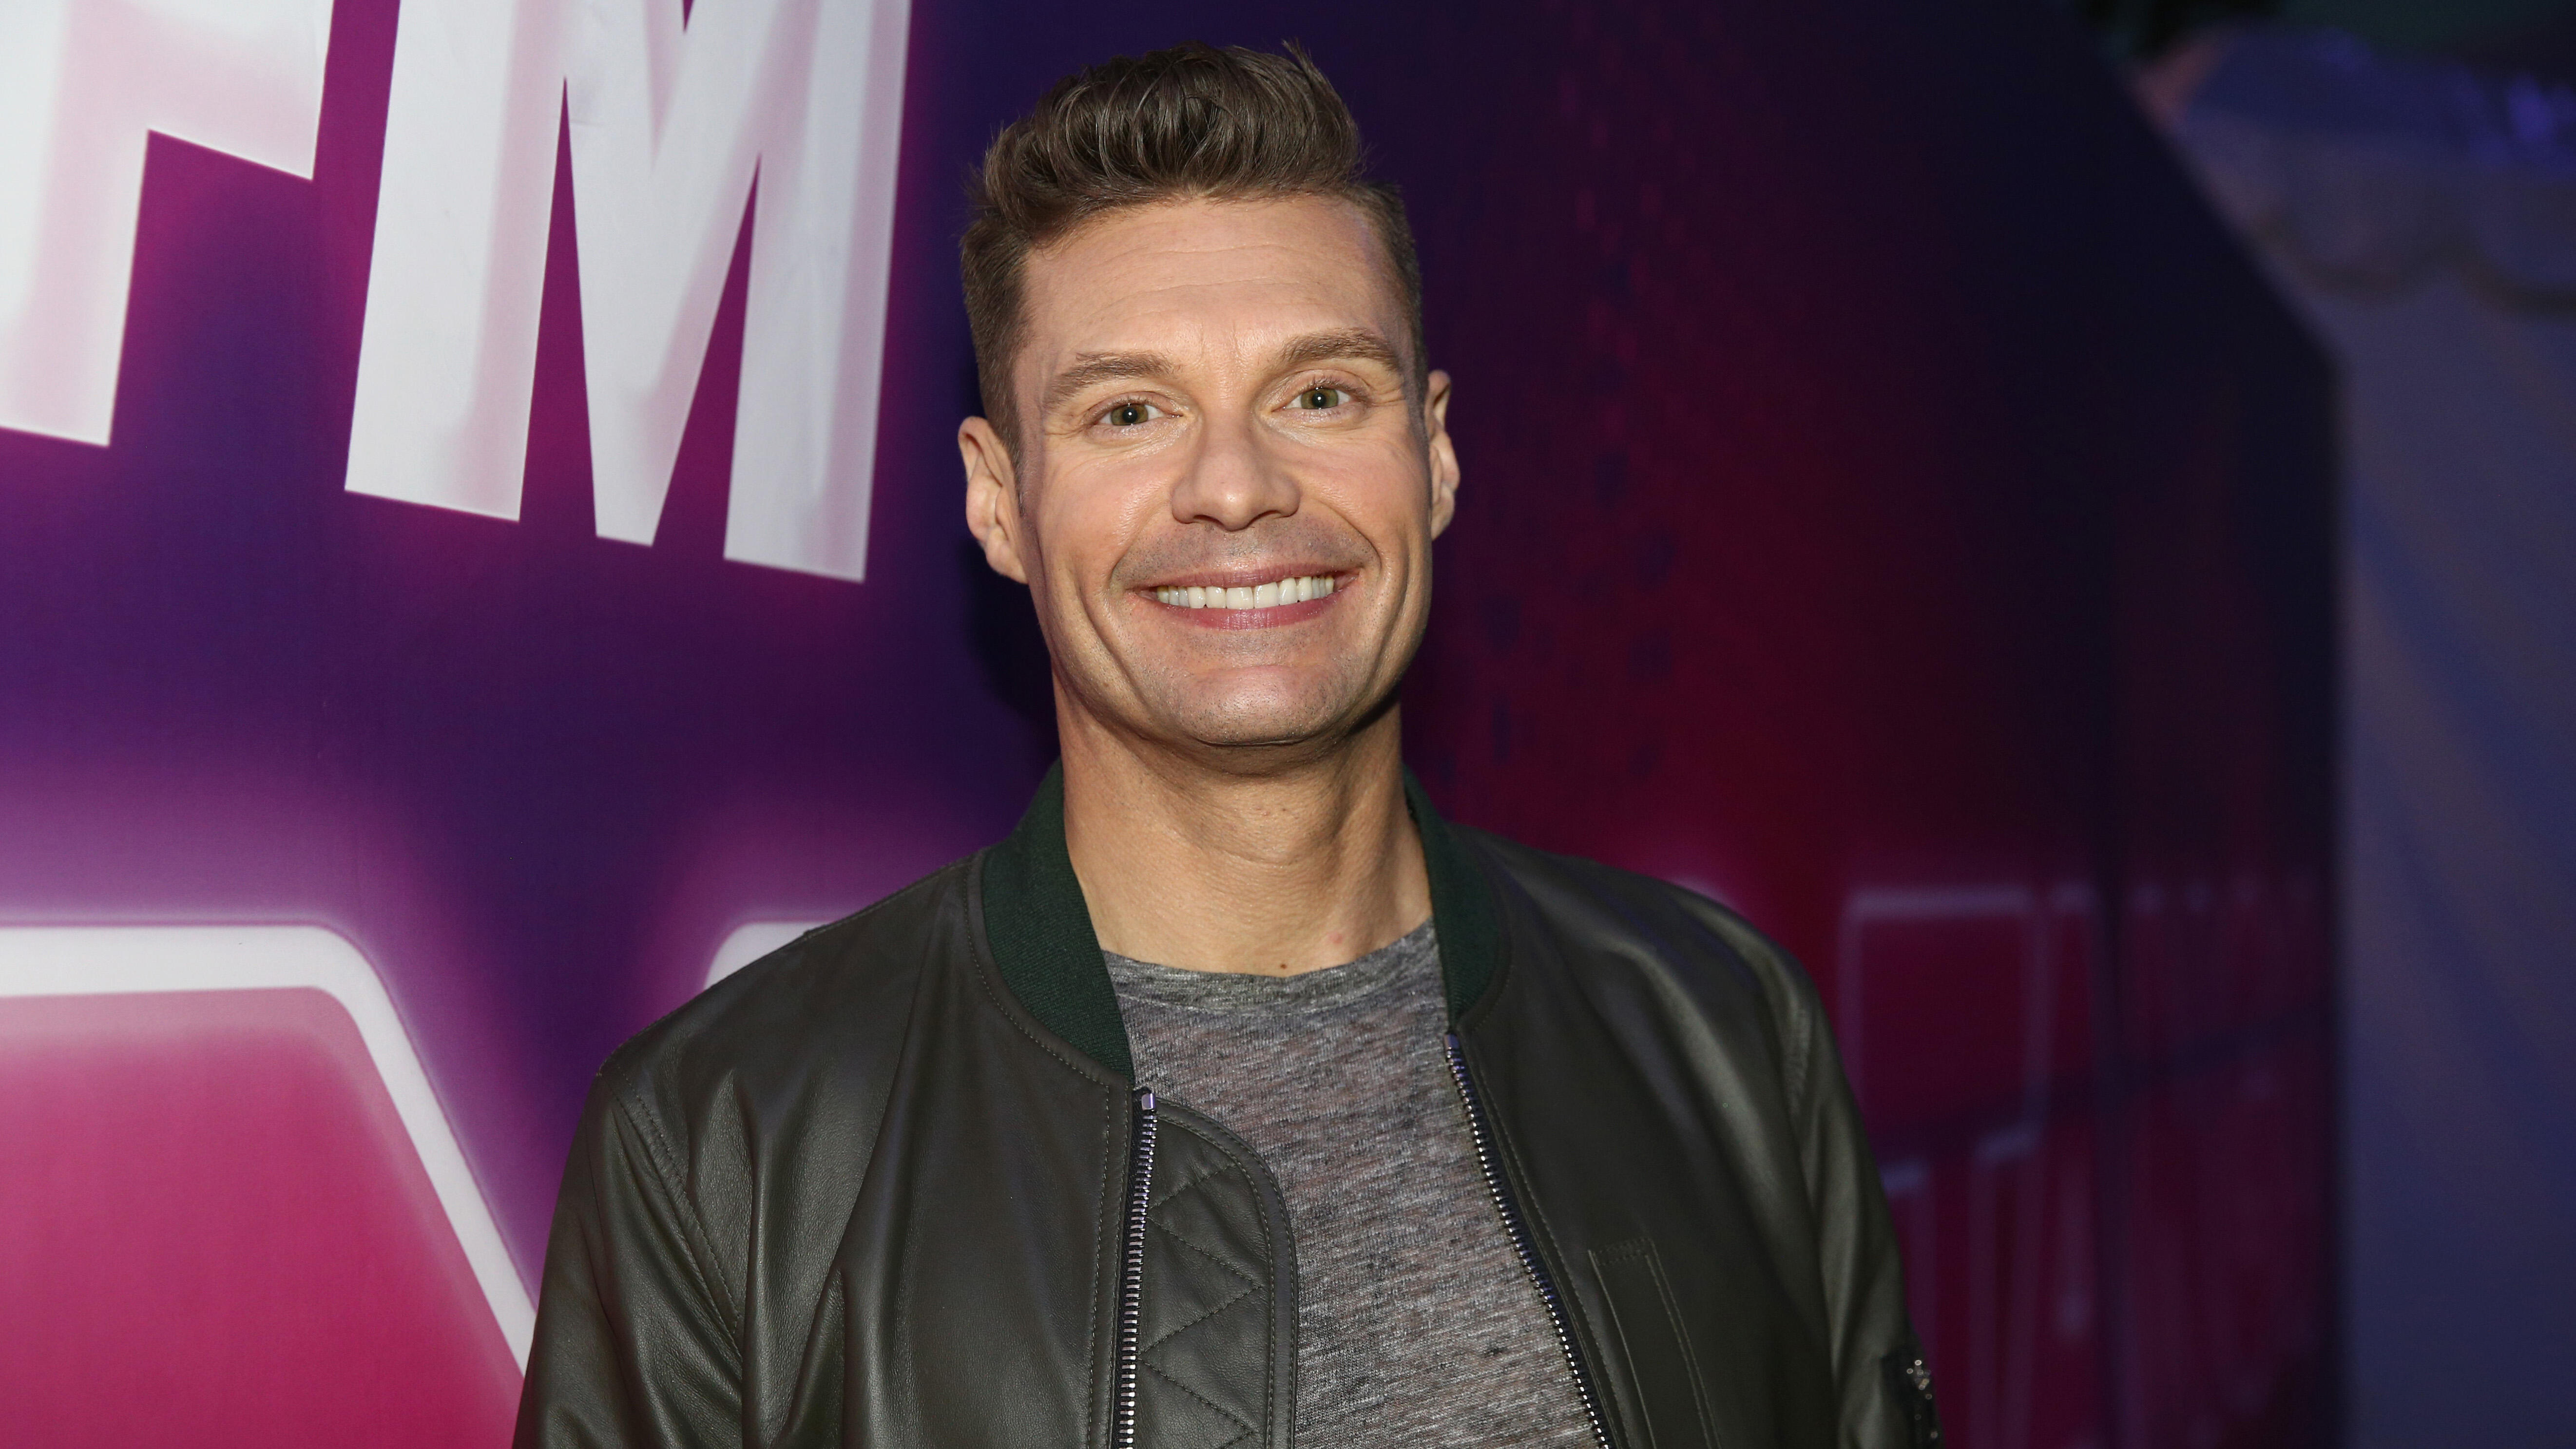 CARSON, CA - MAY 13:  Ryan Seacrest attends 102.7 KIIS FM's 2017 Wango Tango at StubHub Center on May 13, 2017 in Carson, California.  (Photo by Rich Fury/Getty Images)